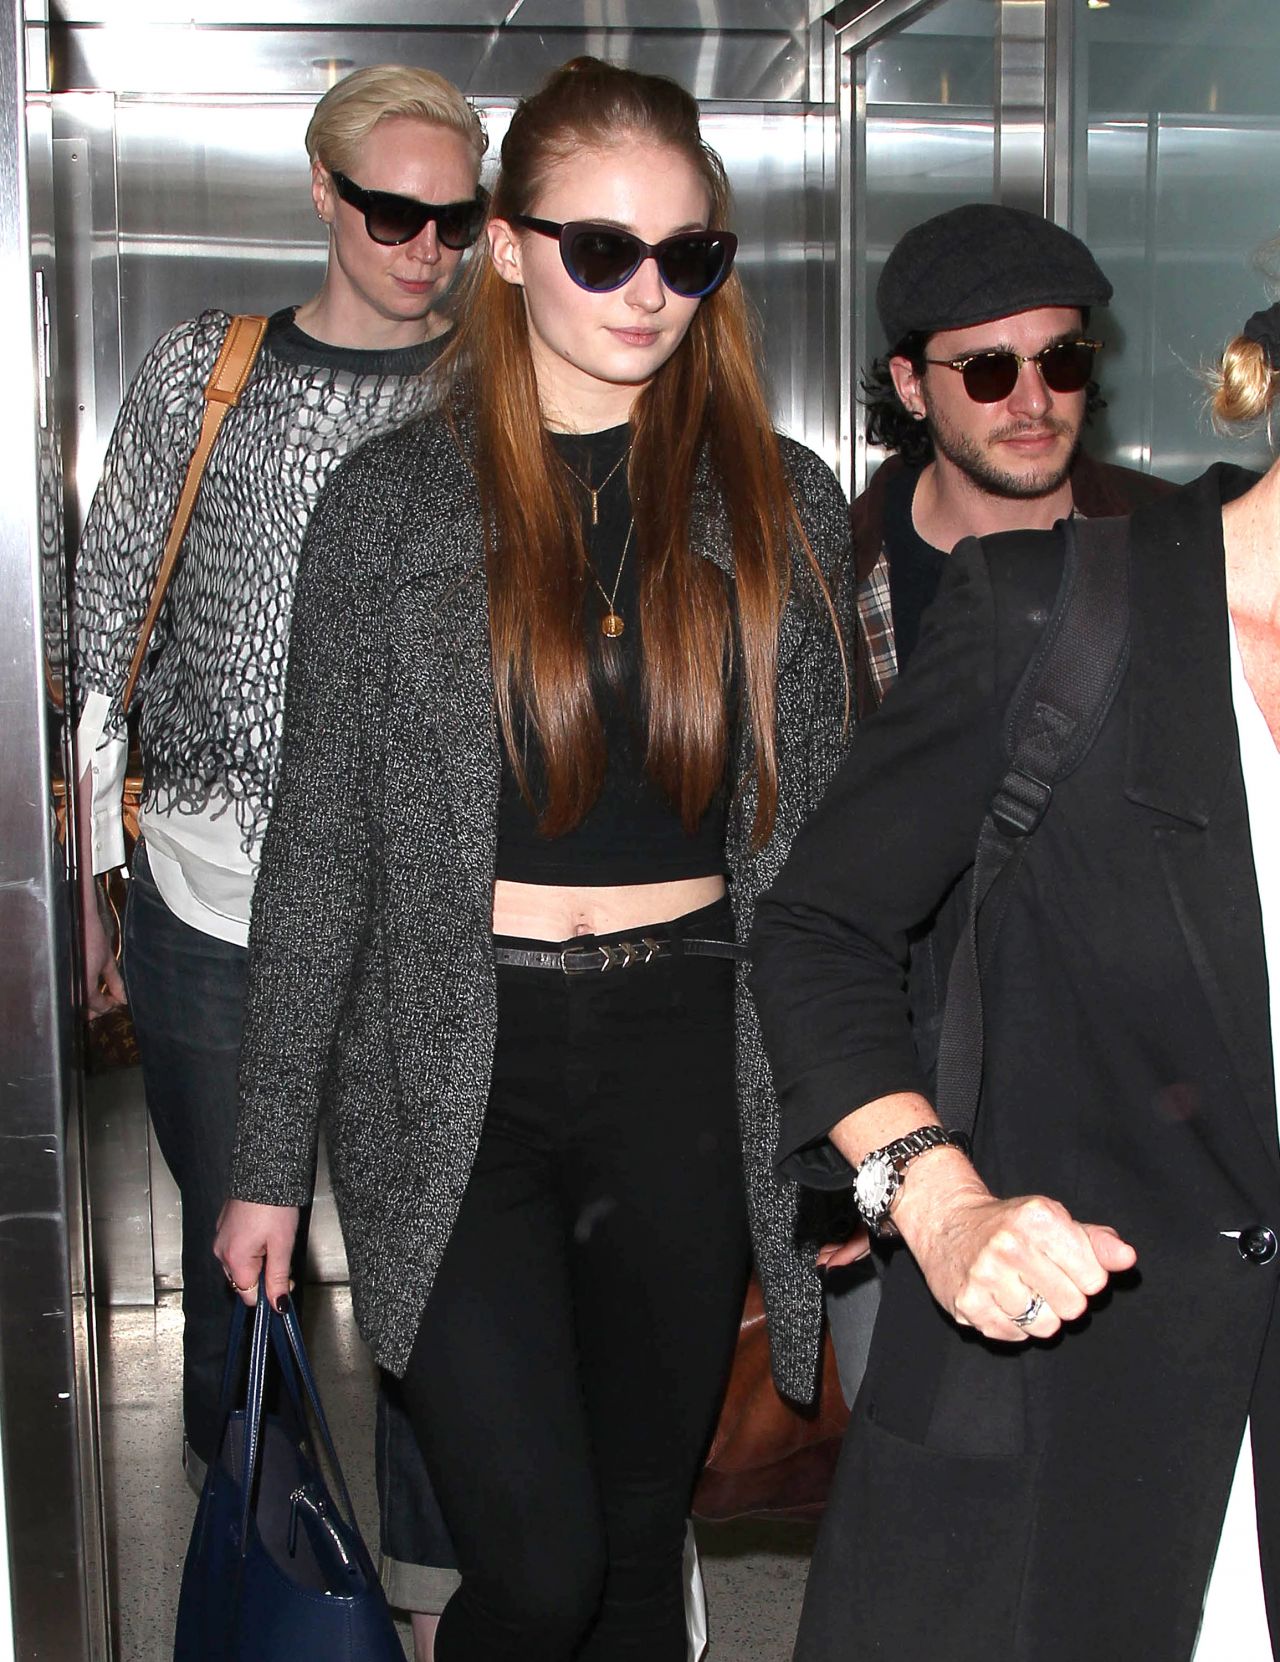 Sophie Turner LAX Airport July 13, 2017 – Star Style